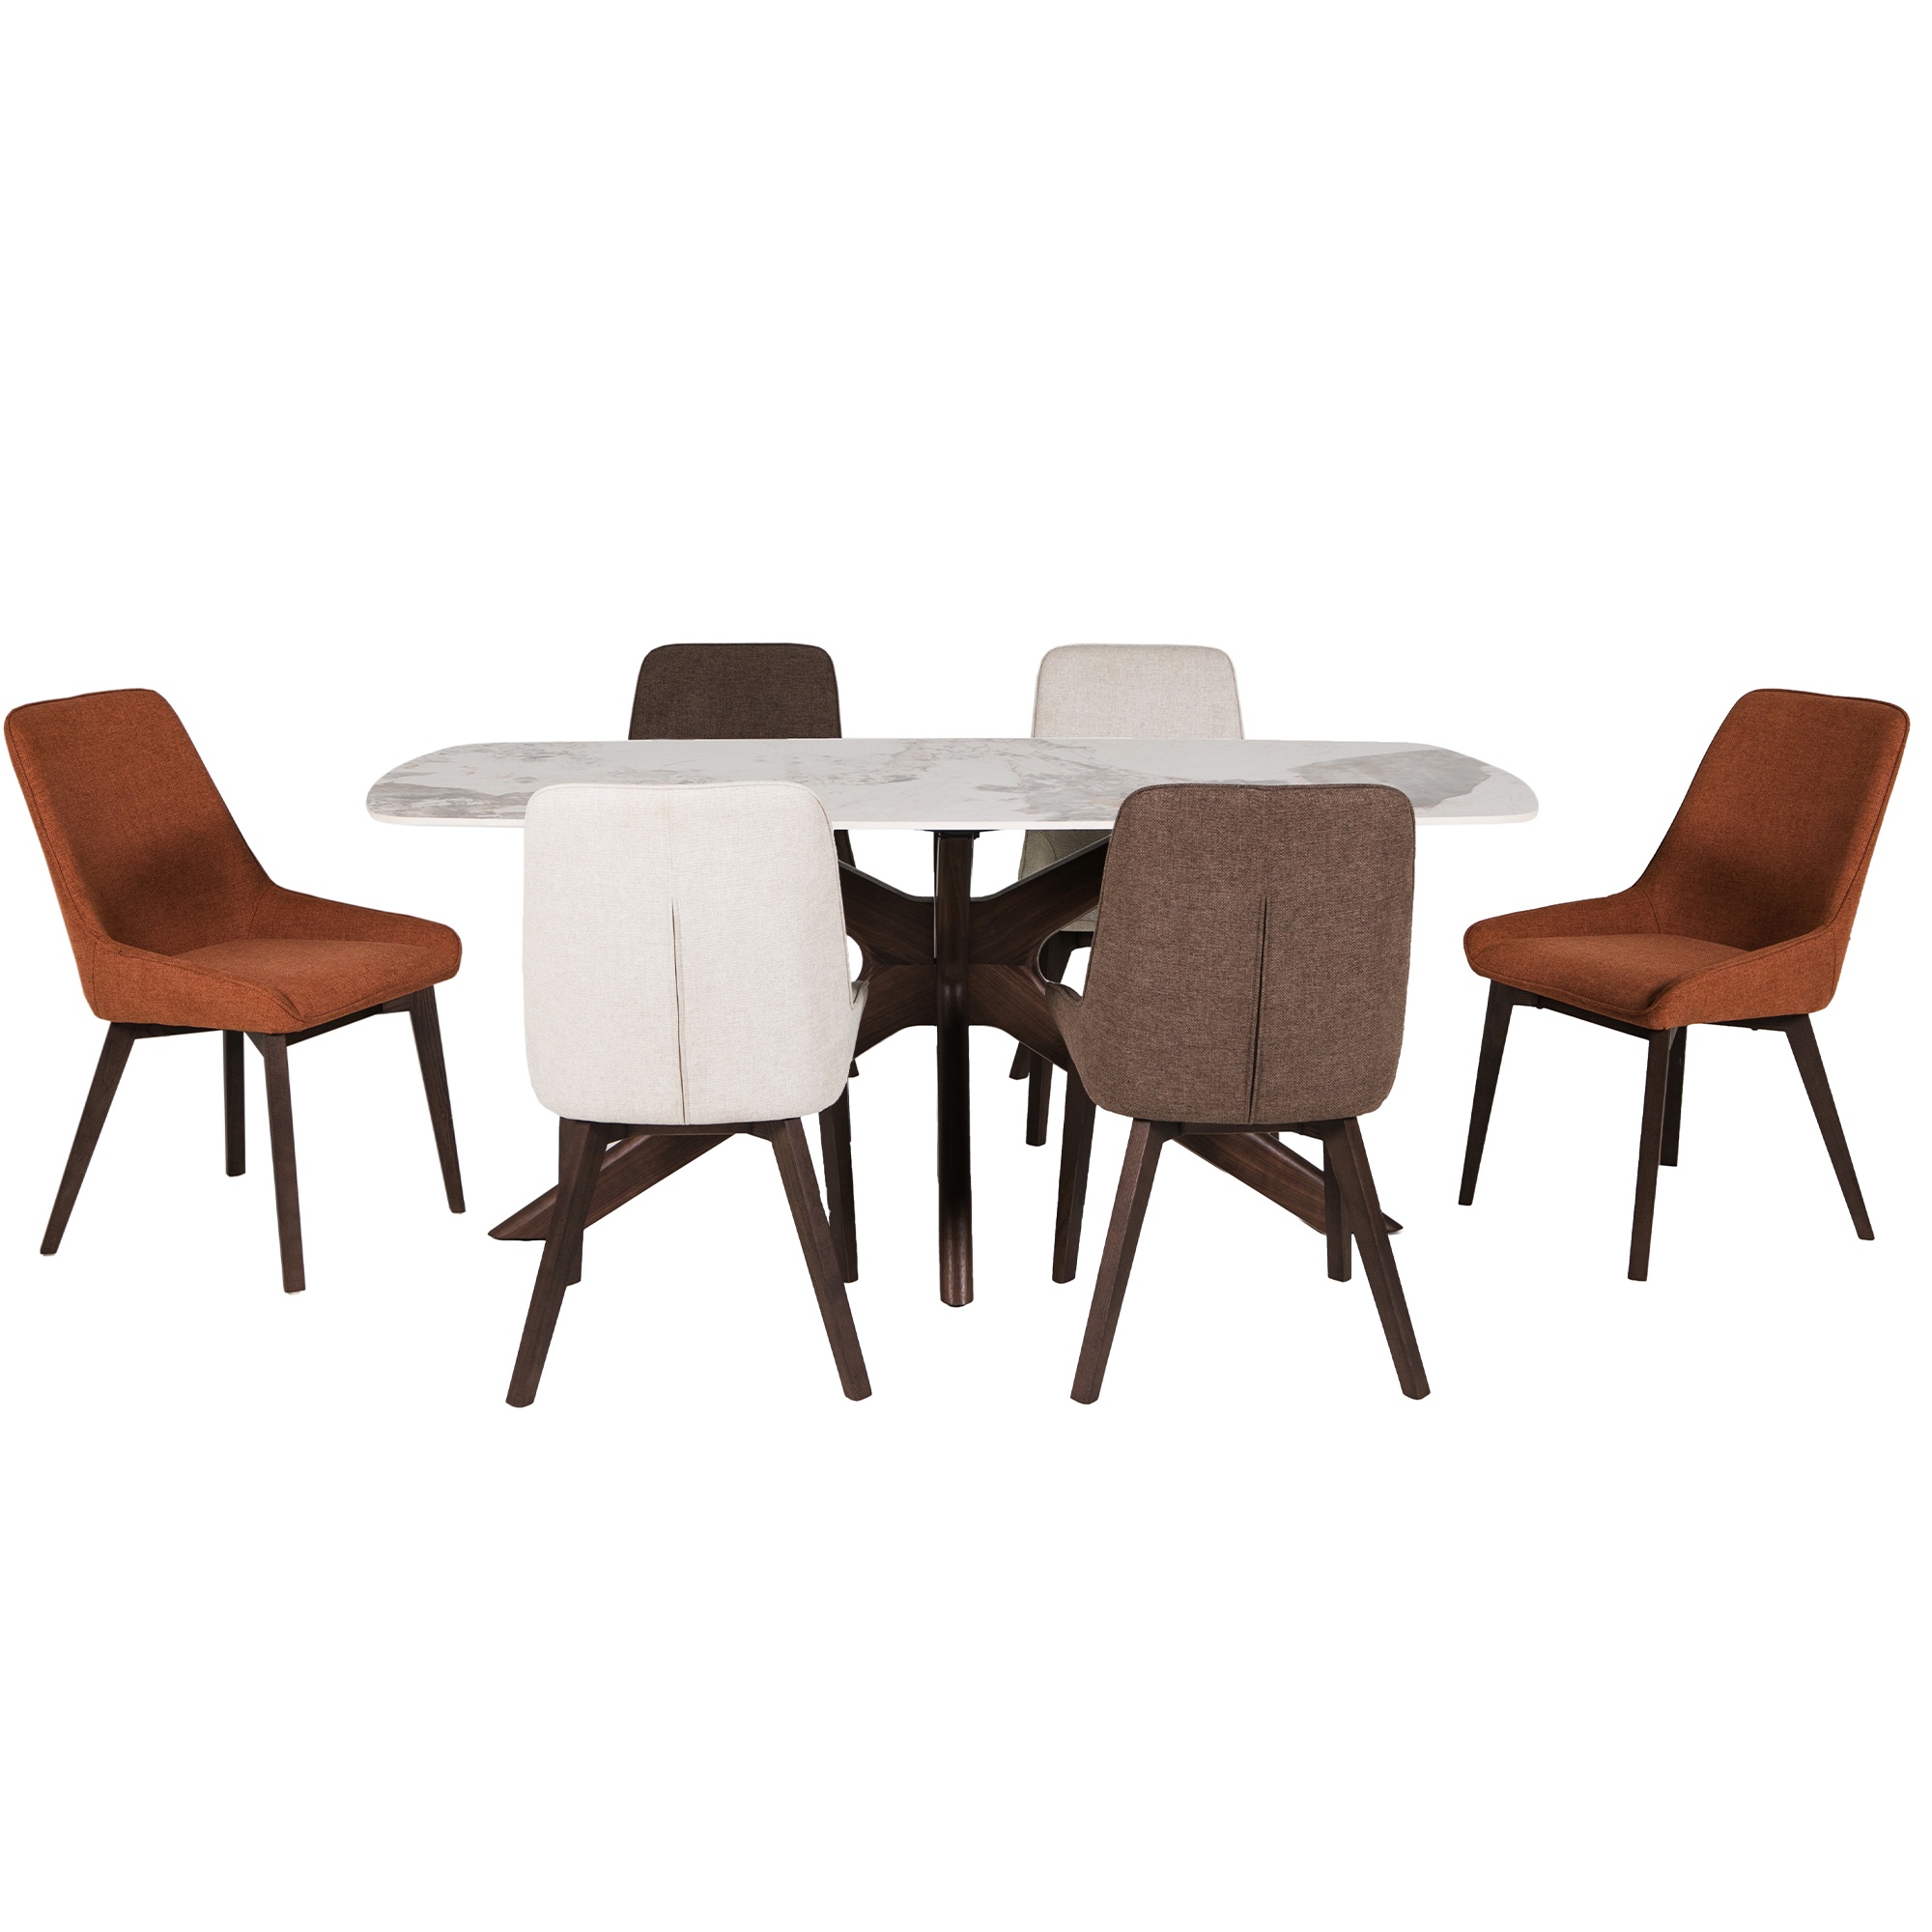 Amelia Dining Table & 6 Aiden Chairs | Dining Furniture | Cookes Furniture